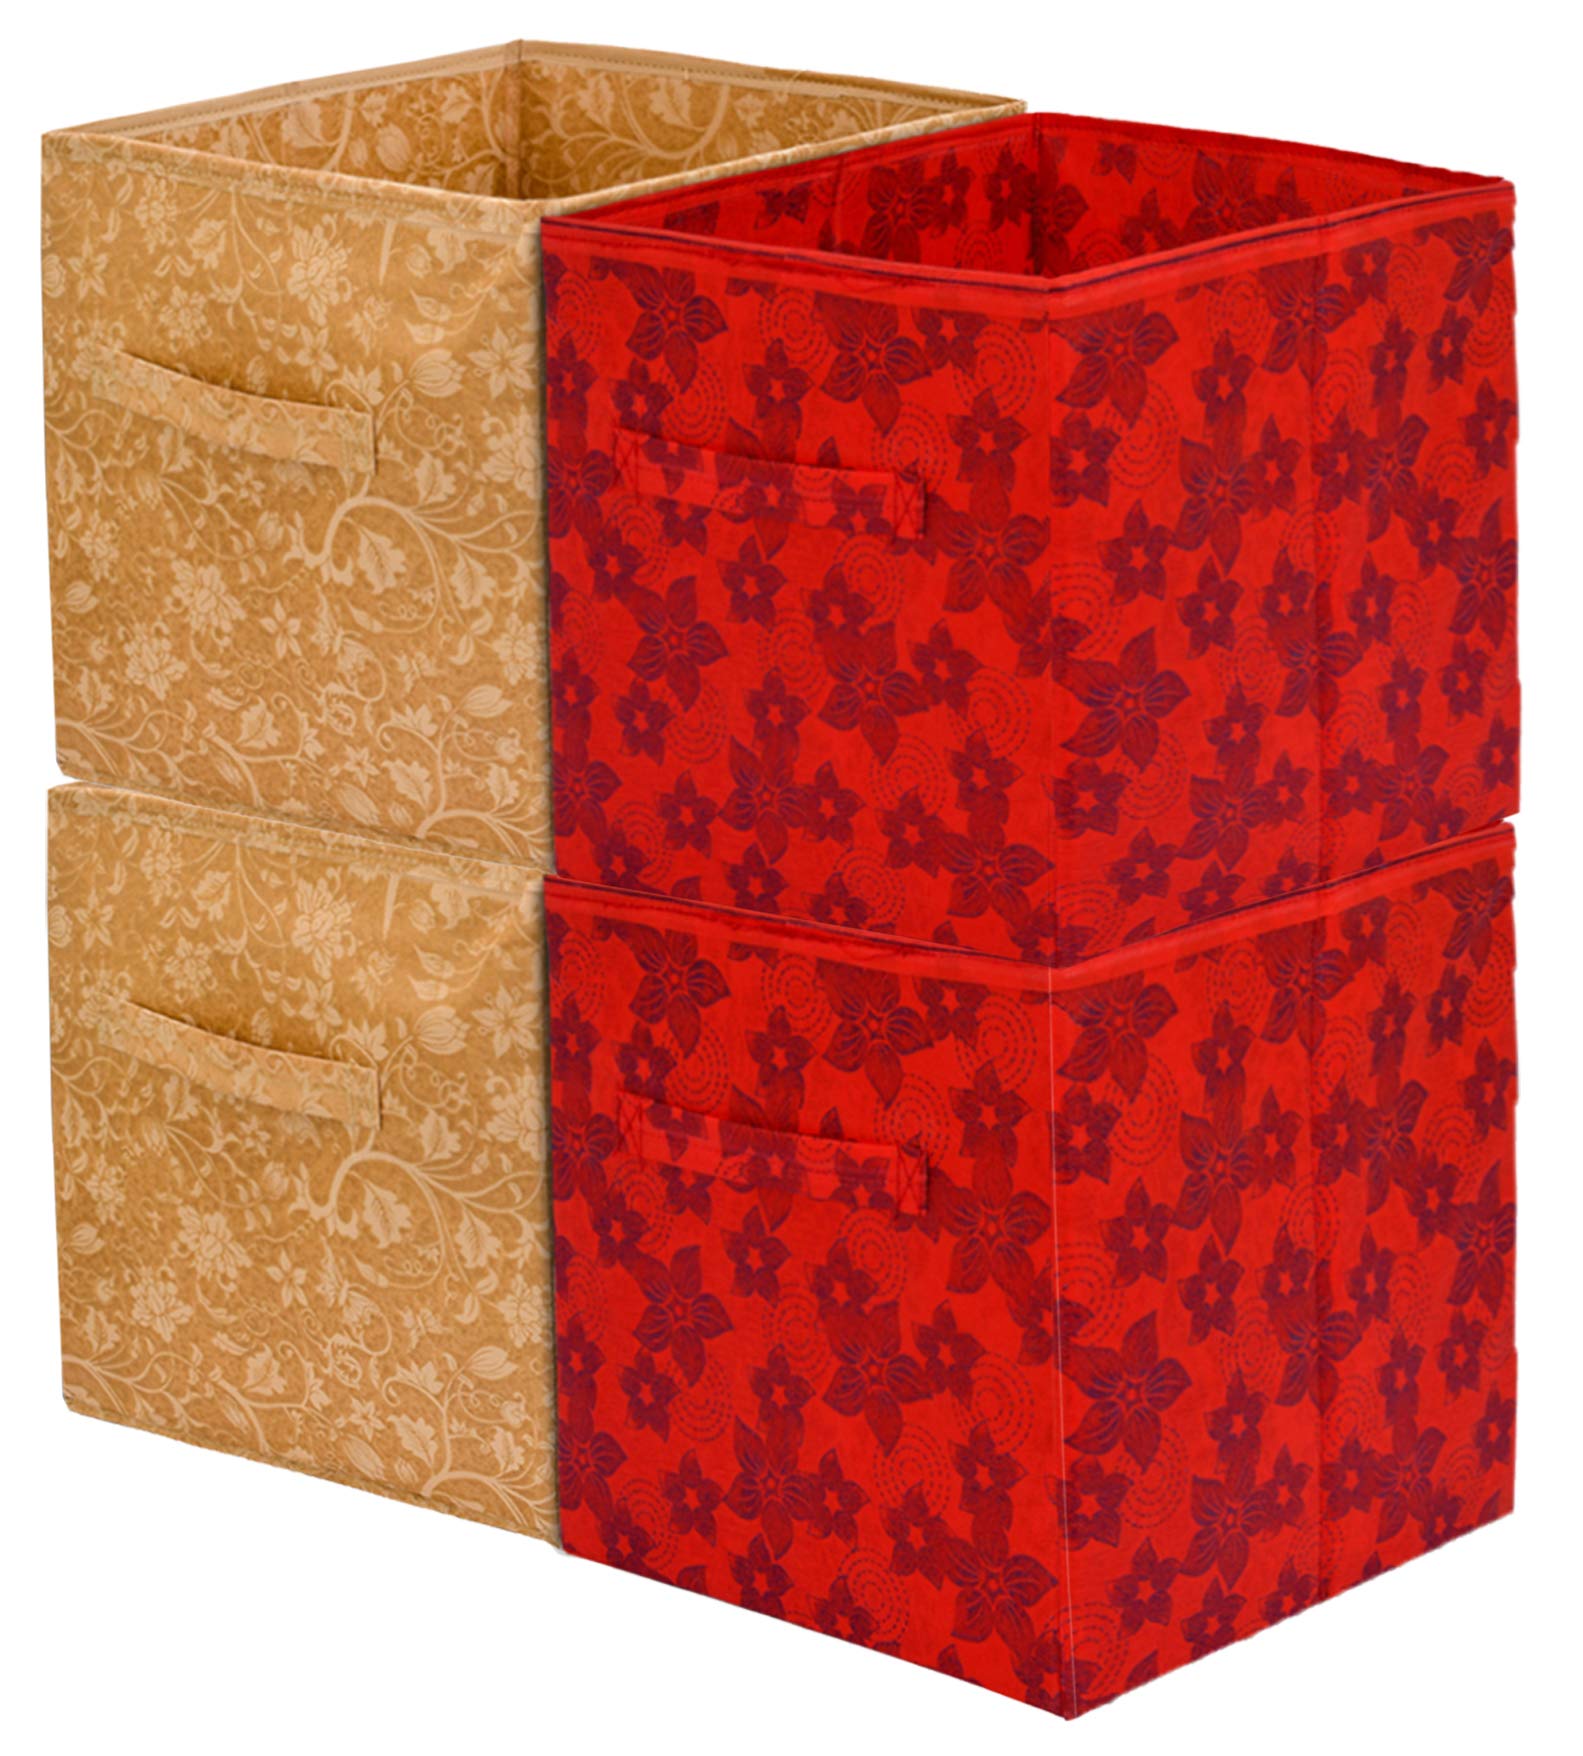 Kuber Industries Metallic Design Non Woven 4 Pieces Large Foldable Storage Organiser Cubes/Boxes (Red & Beige) - CTKTC35621